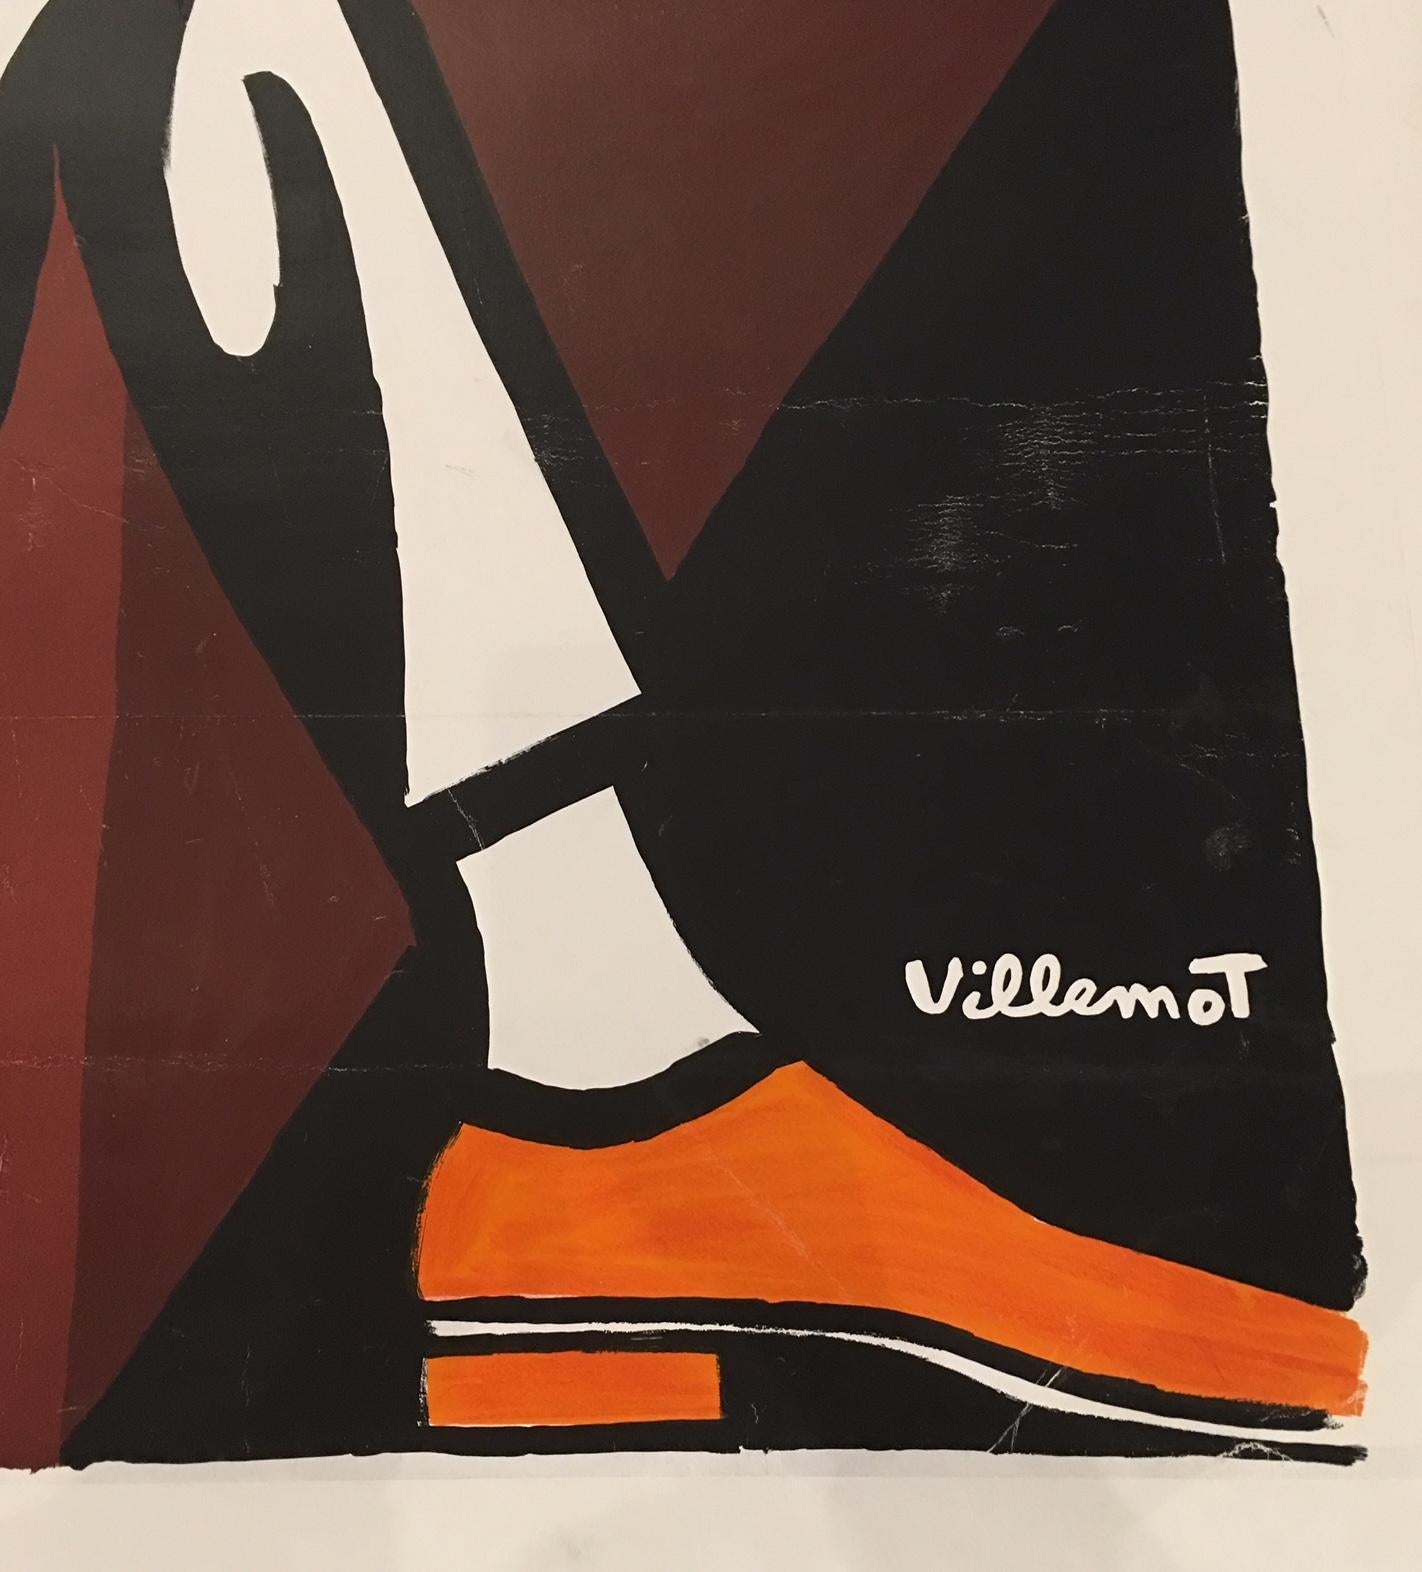 Bernard Villemot was a French graphic artist known primarily for his iconic advertising images for Orangina, Bally Shoe, Perrier, and Air France.

Artist: 
Bernard Villemot

Year 
1986

Dimensions: 
128 x 162 cm

Condition: